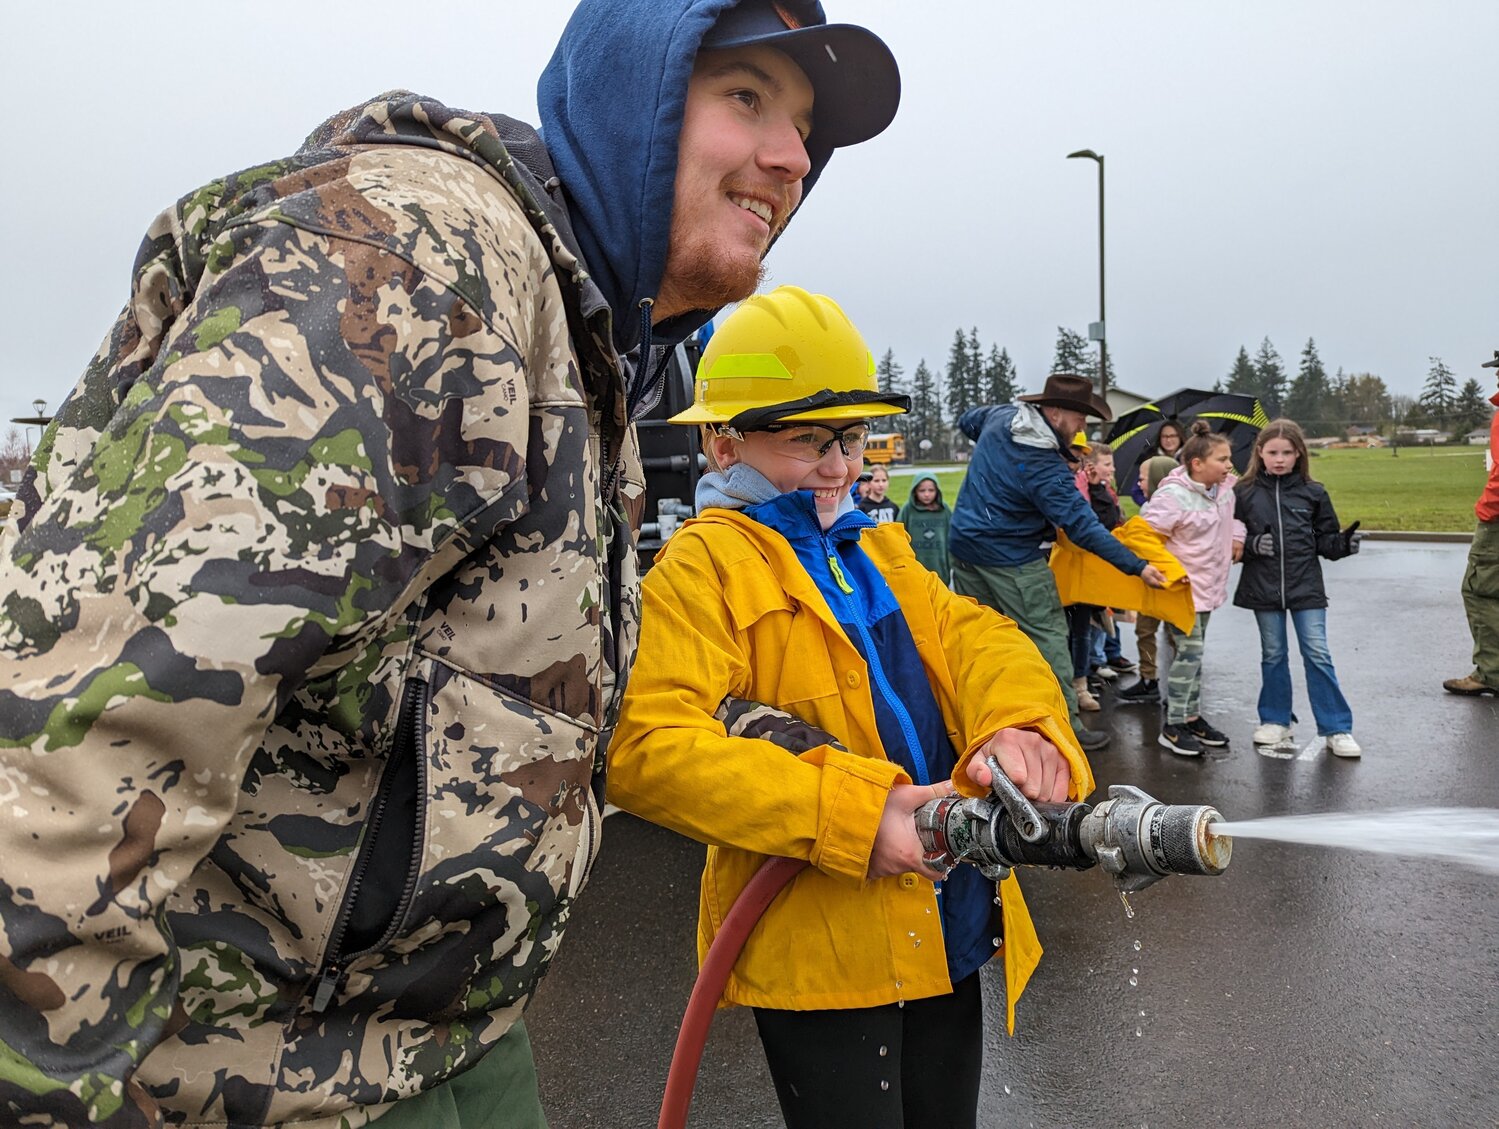 Students smile while using a fire hose outside Orin C. Smith Elementary in Chehalis.